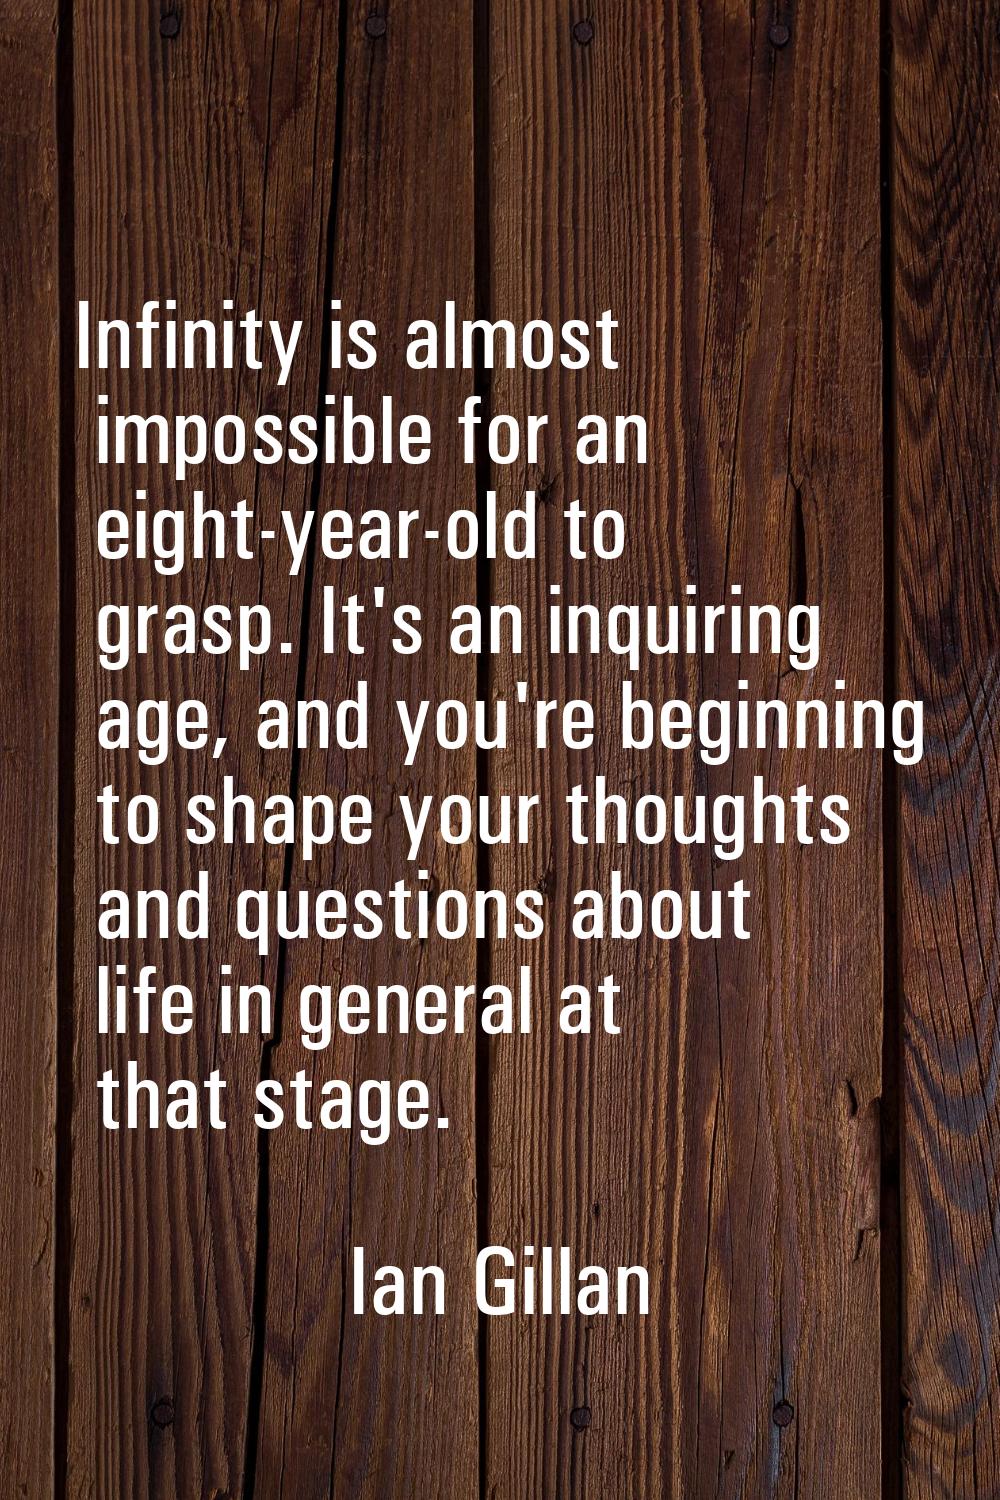 Infinity is almost impossible for an eight-year-old to grasp. It's an inquiring age, and you're beg